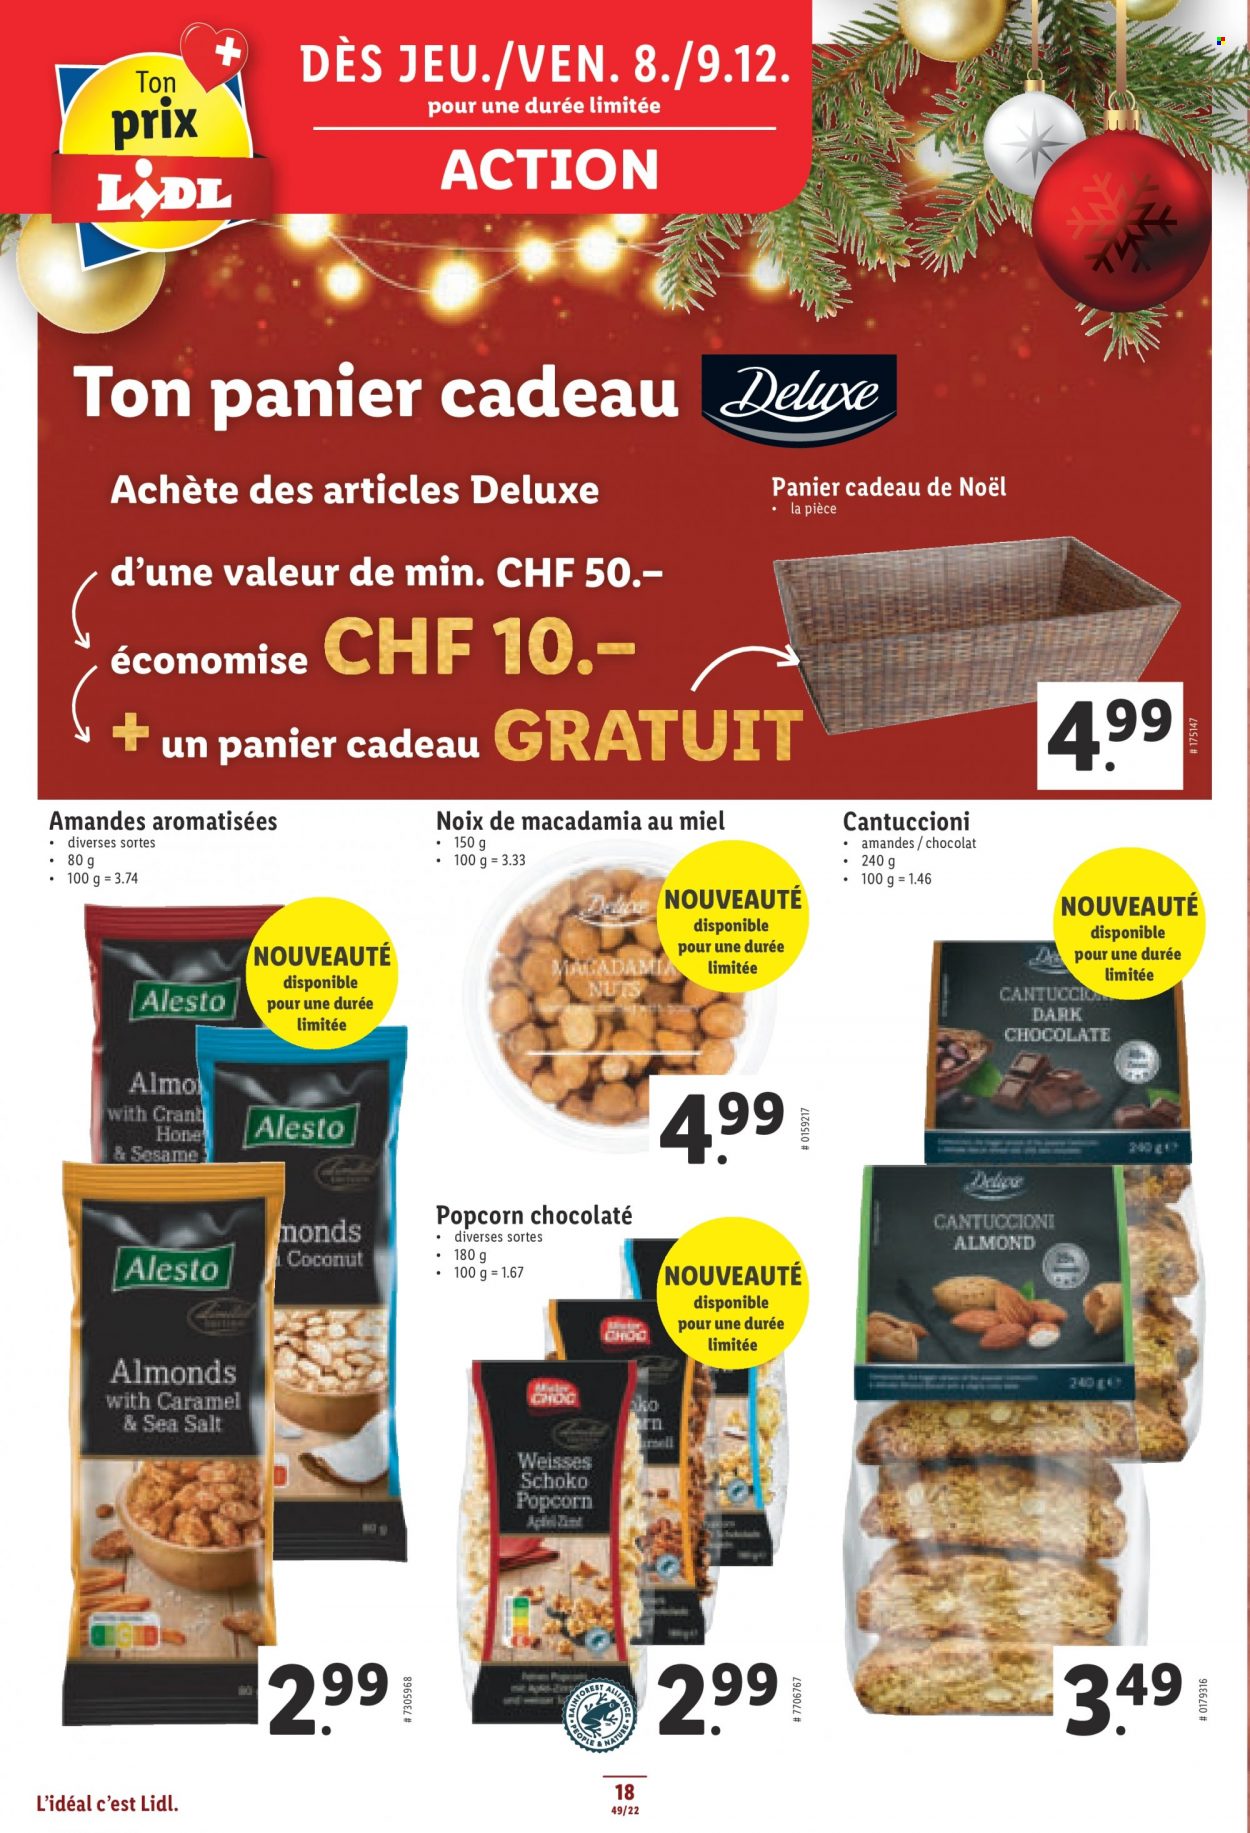 Catalogue Lidl - 8.12.2022 - 14.12.2022. Page 18.